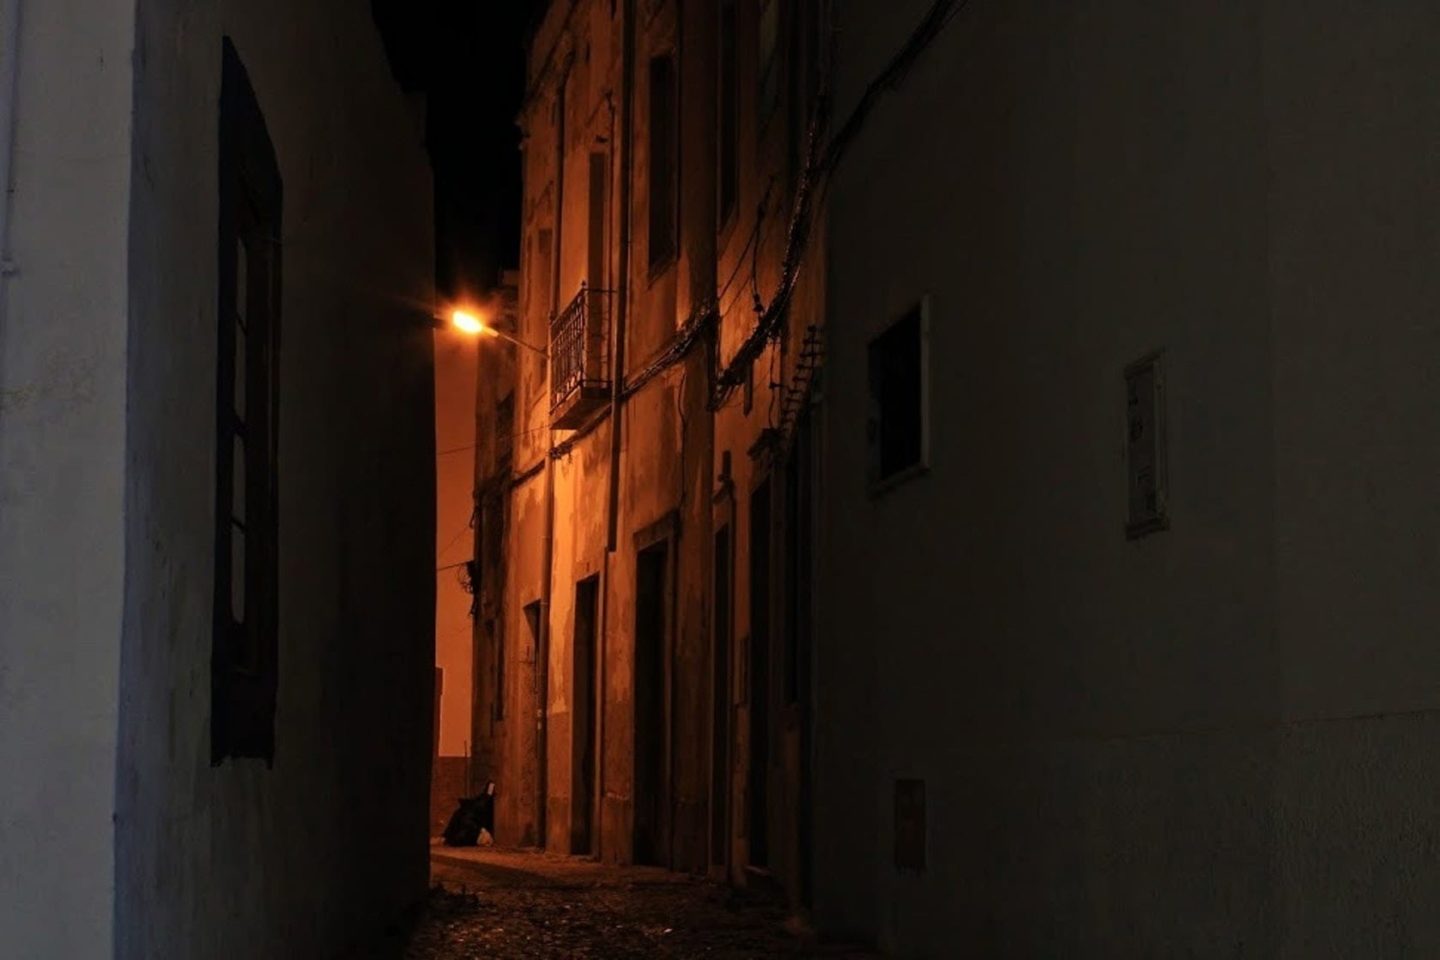 Mythical night walk in Olhao